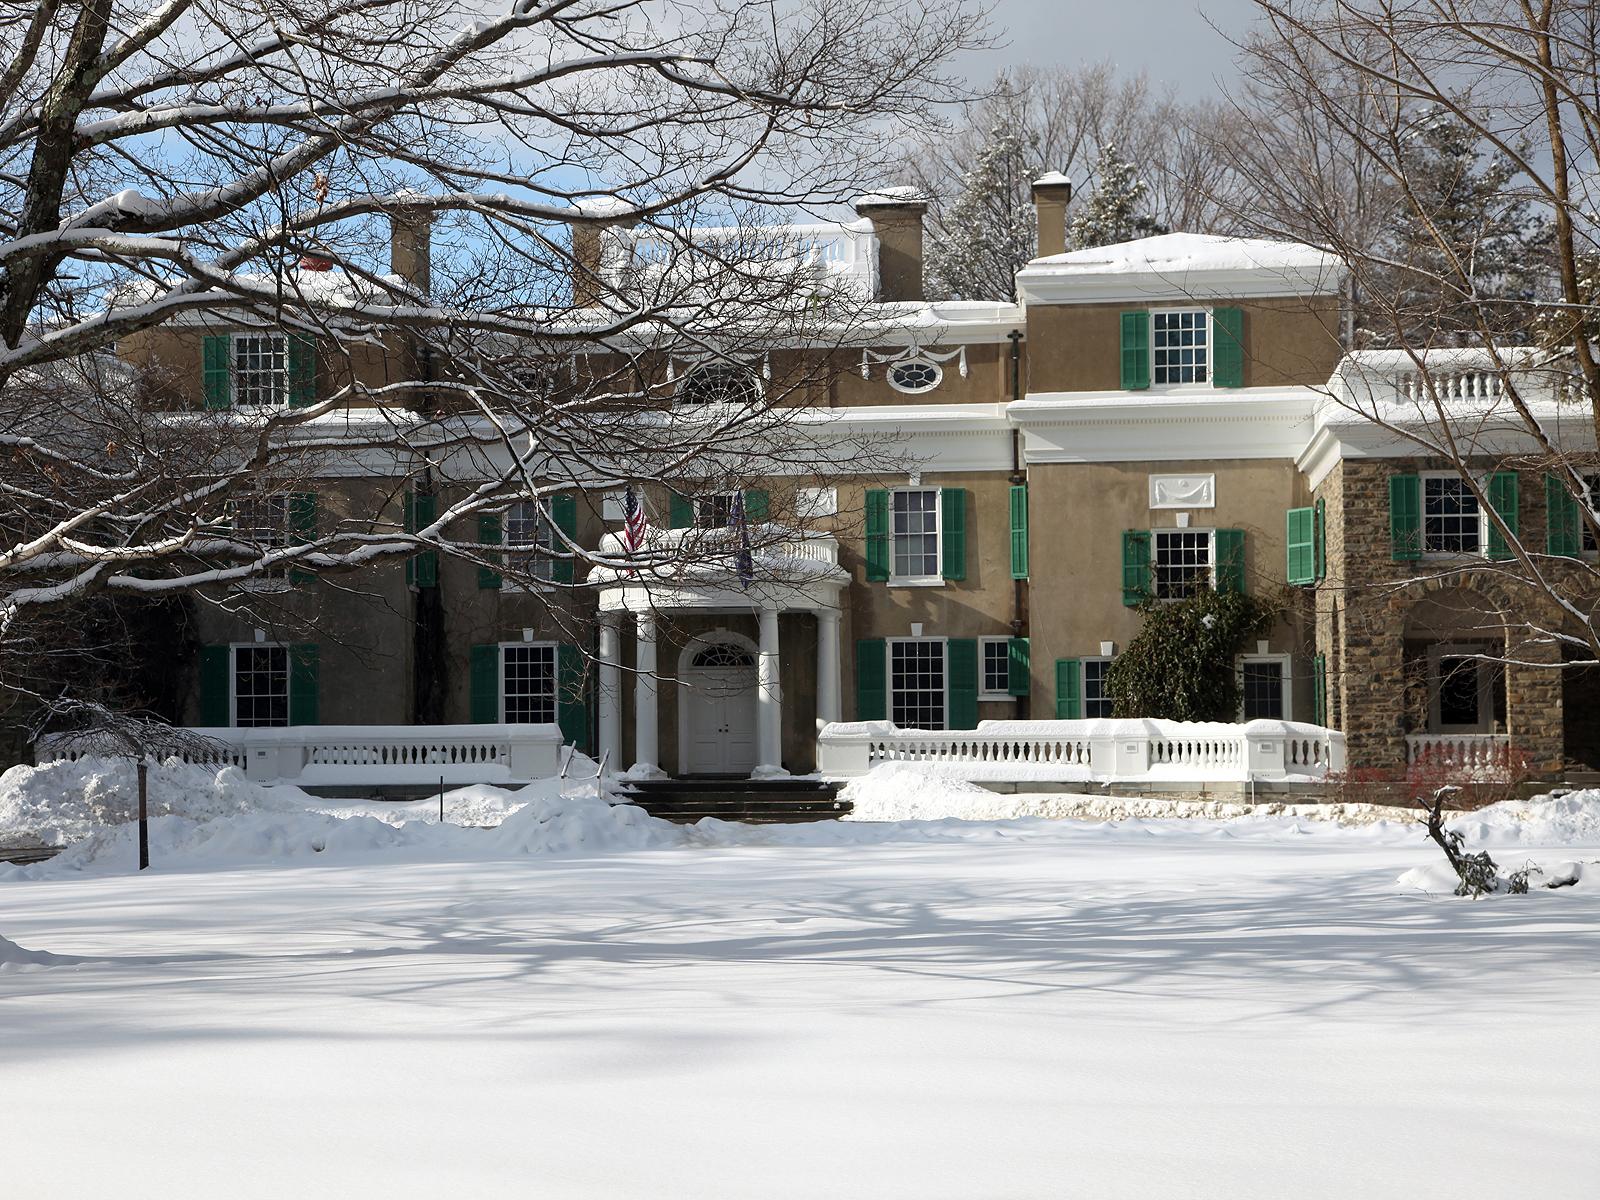 A stucco house with wood portico surrounded by a snowy lawn.